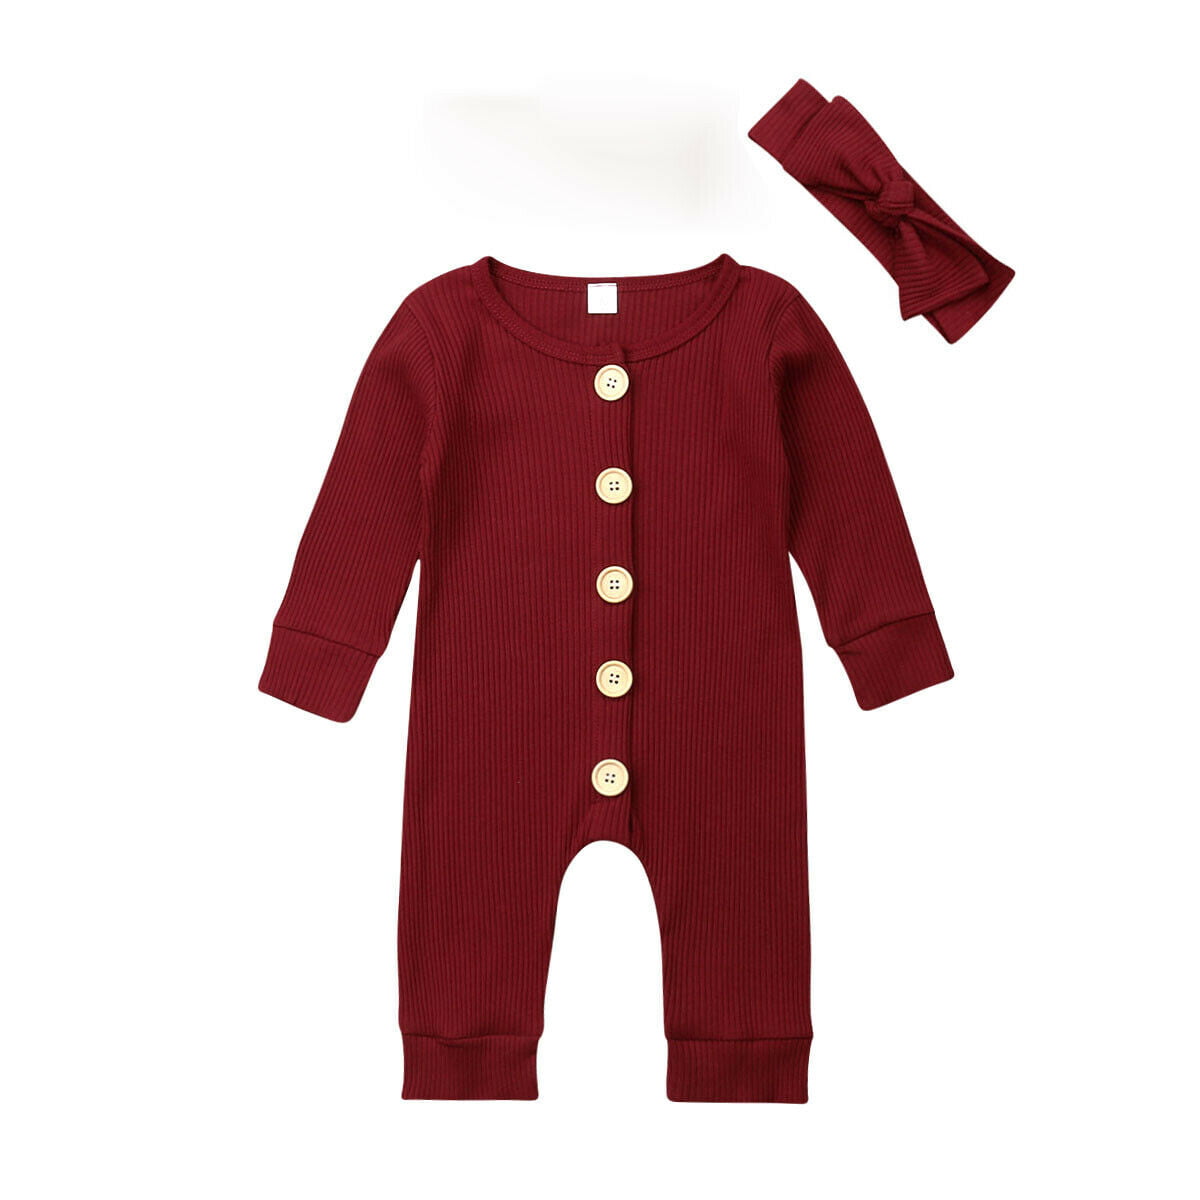 Baby Toddler Overalls Unisex Newborn Romper Outfit Sets for Boys and Girls